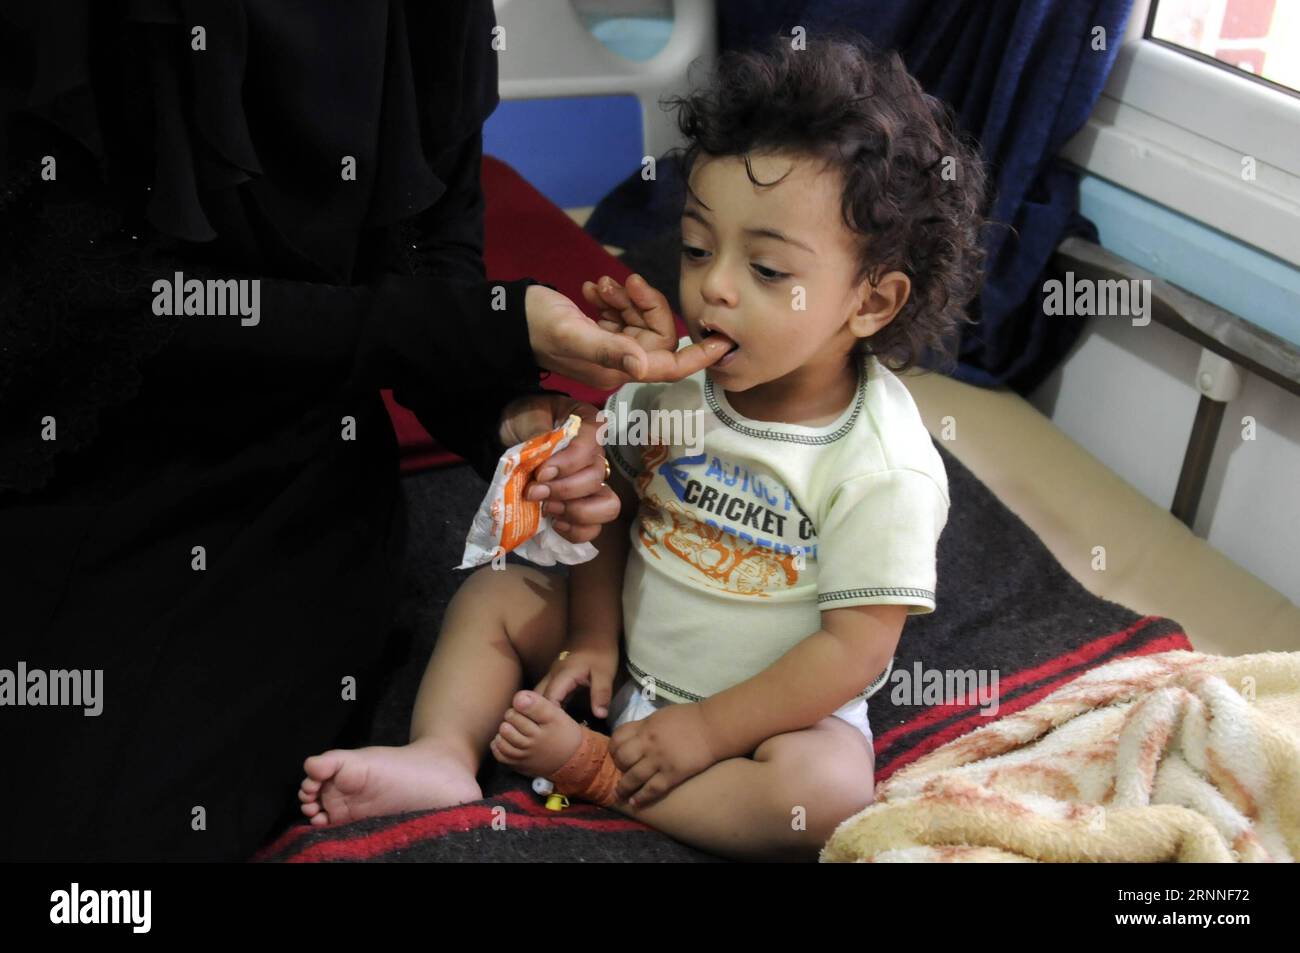 (170711) -- SANAA, July 11, 2017 -- A woman feeds her cholera-infected child at a hospital in Sanaa, Yemen, on July 11, 2017. Cholera disease has infected more than 300,000 people in war-torn Yemen since late April, the international Committee of the Red Cross (ICRC) said on Monday. ) YEMEN-SANAA-CHOLERA-OVER 300,000 PEOPLE MohammedxMohammed PUBLICATIONxNOTxINxCHN   Sanaa July 11 2017 a Woman feeds her Cholera infected Child AT a Hospital in Sanaa Yemen ON July 11 2017 Cholera Disease has infected More than 300 000 Celebrities in was Torn Yemen Since Late April The International Committee of T Stock Photo